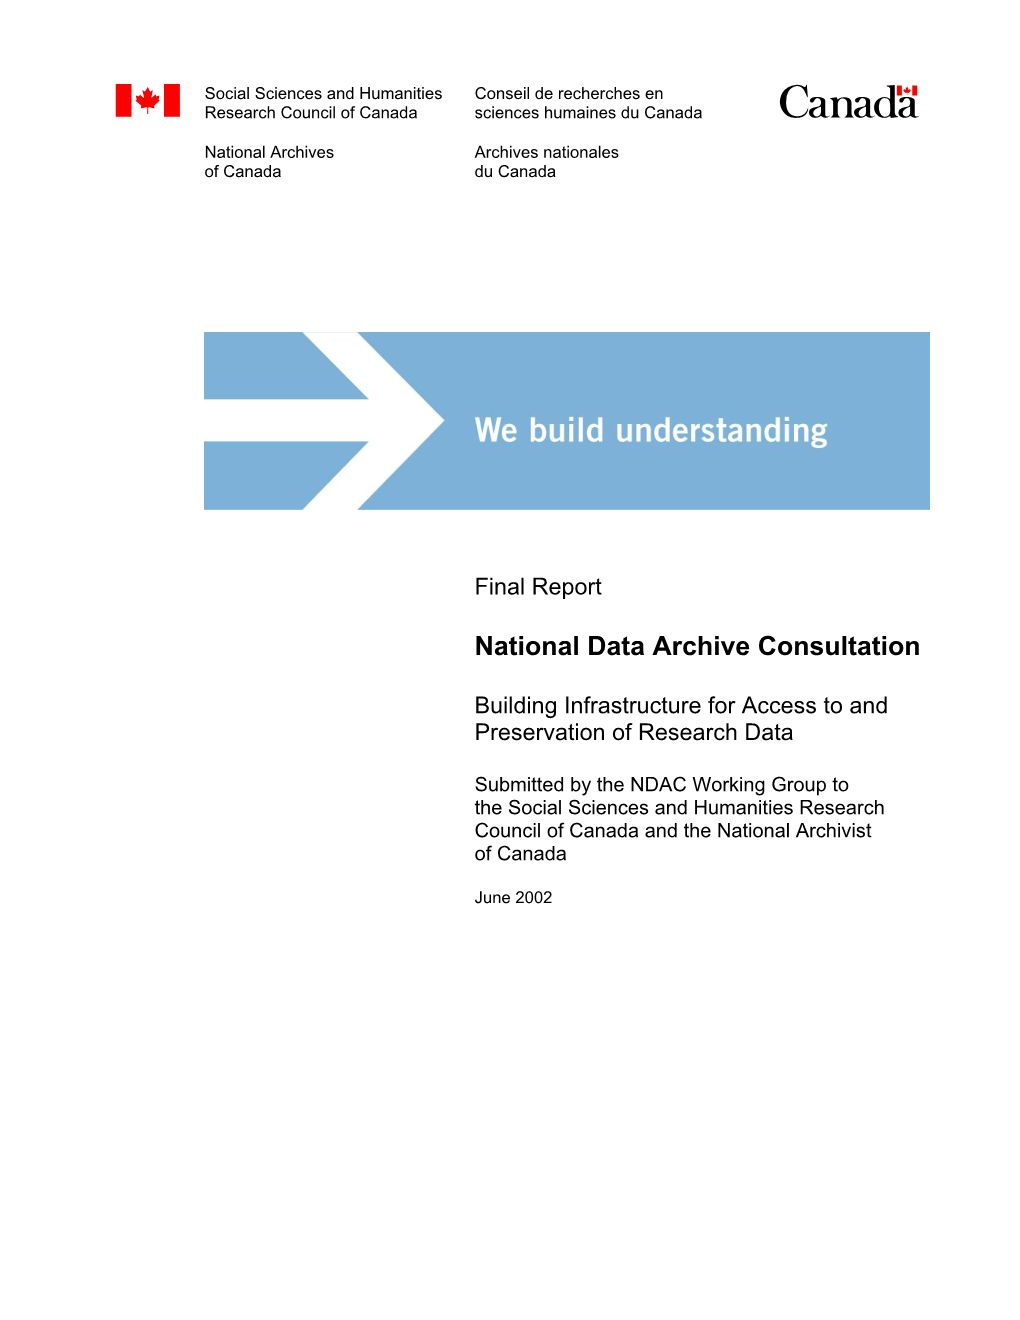 National Data Archive Consultation Final Report